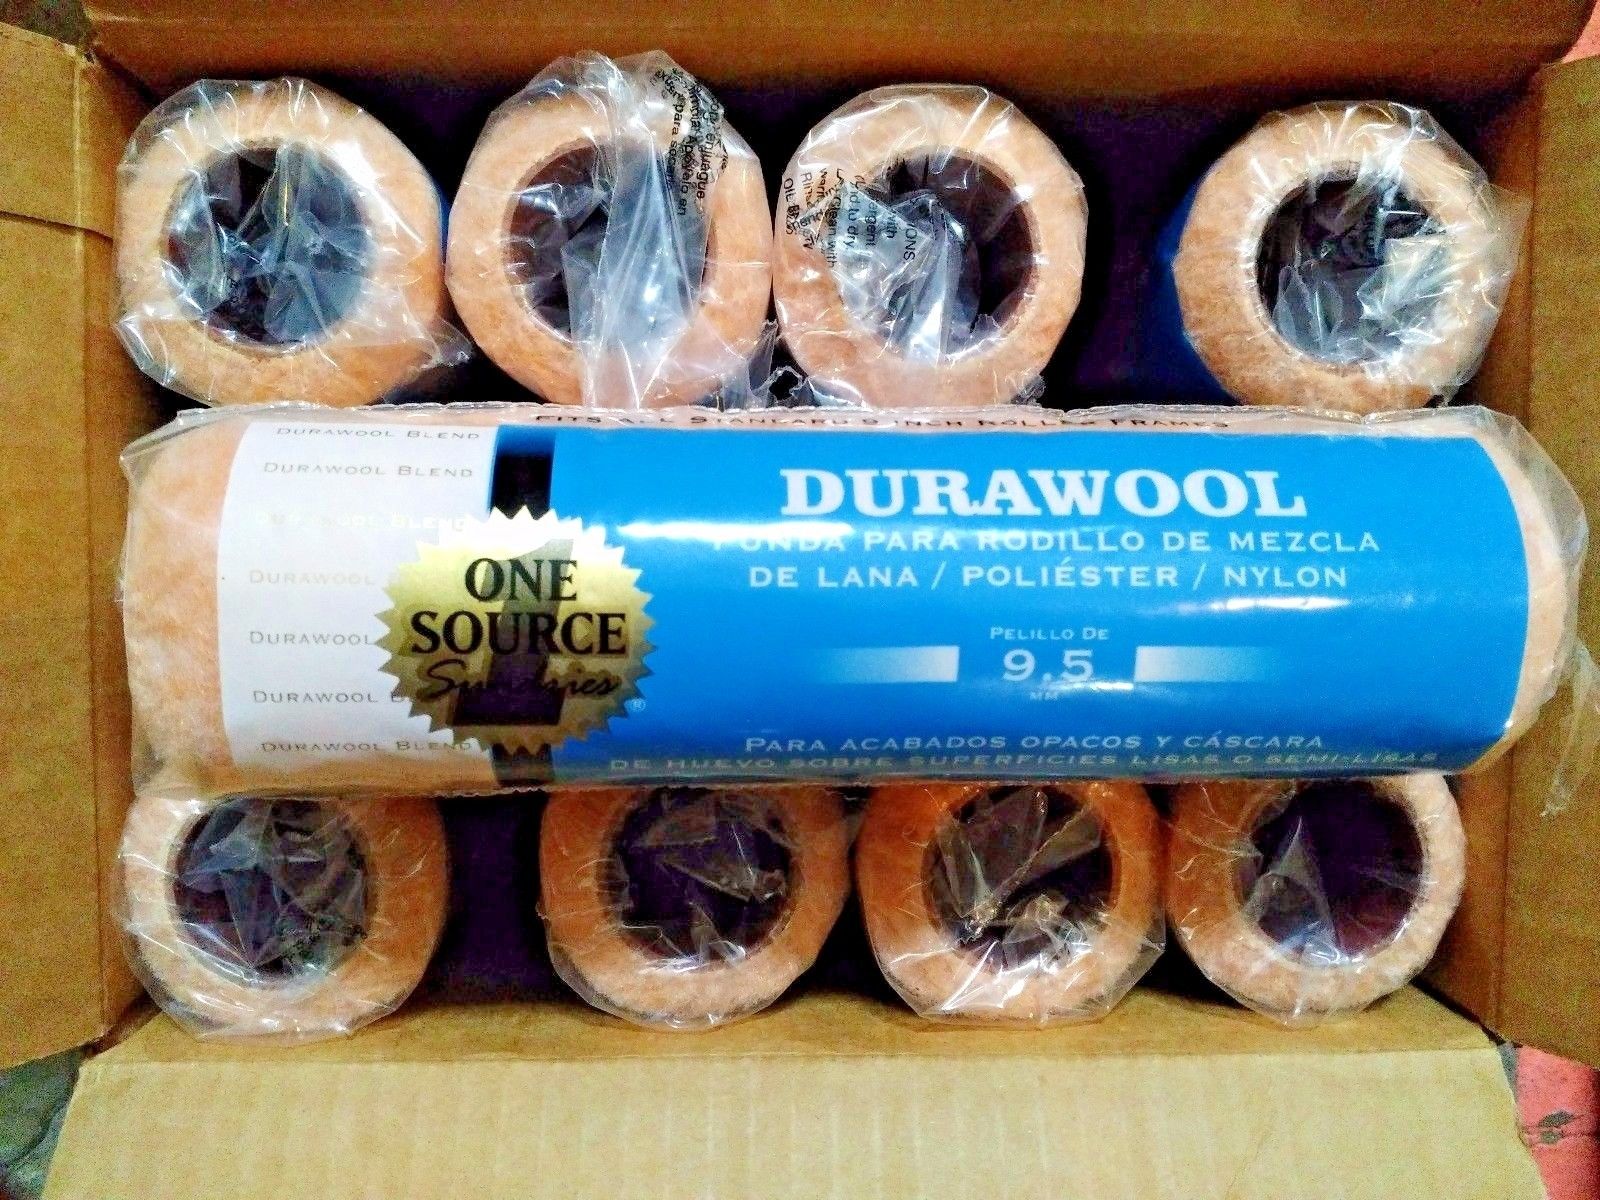 Durawool 2310 9" x 3/8" Roller Covers 12pcs. Made In The USA